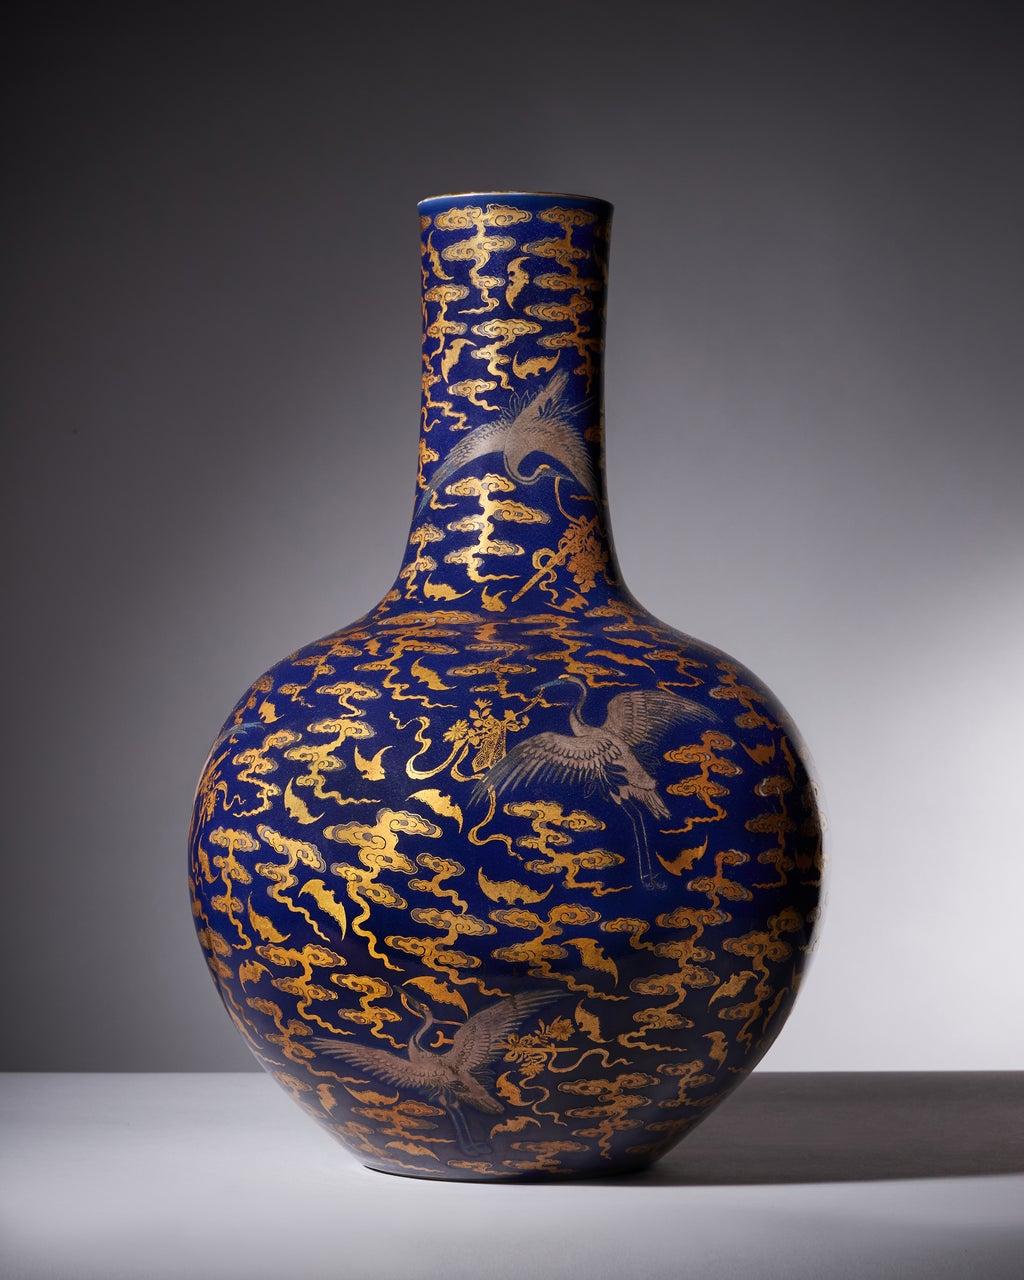 Rare Chinese vase sells for £1.5 million after being spotted in kitchen